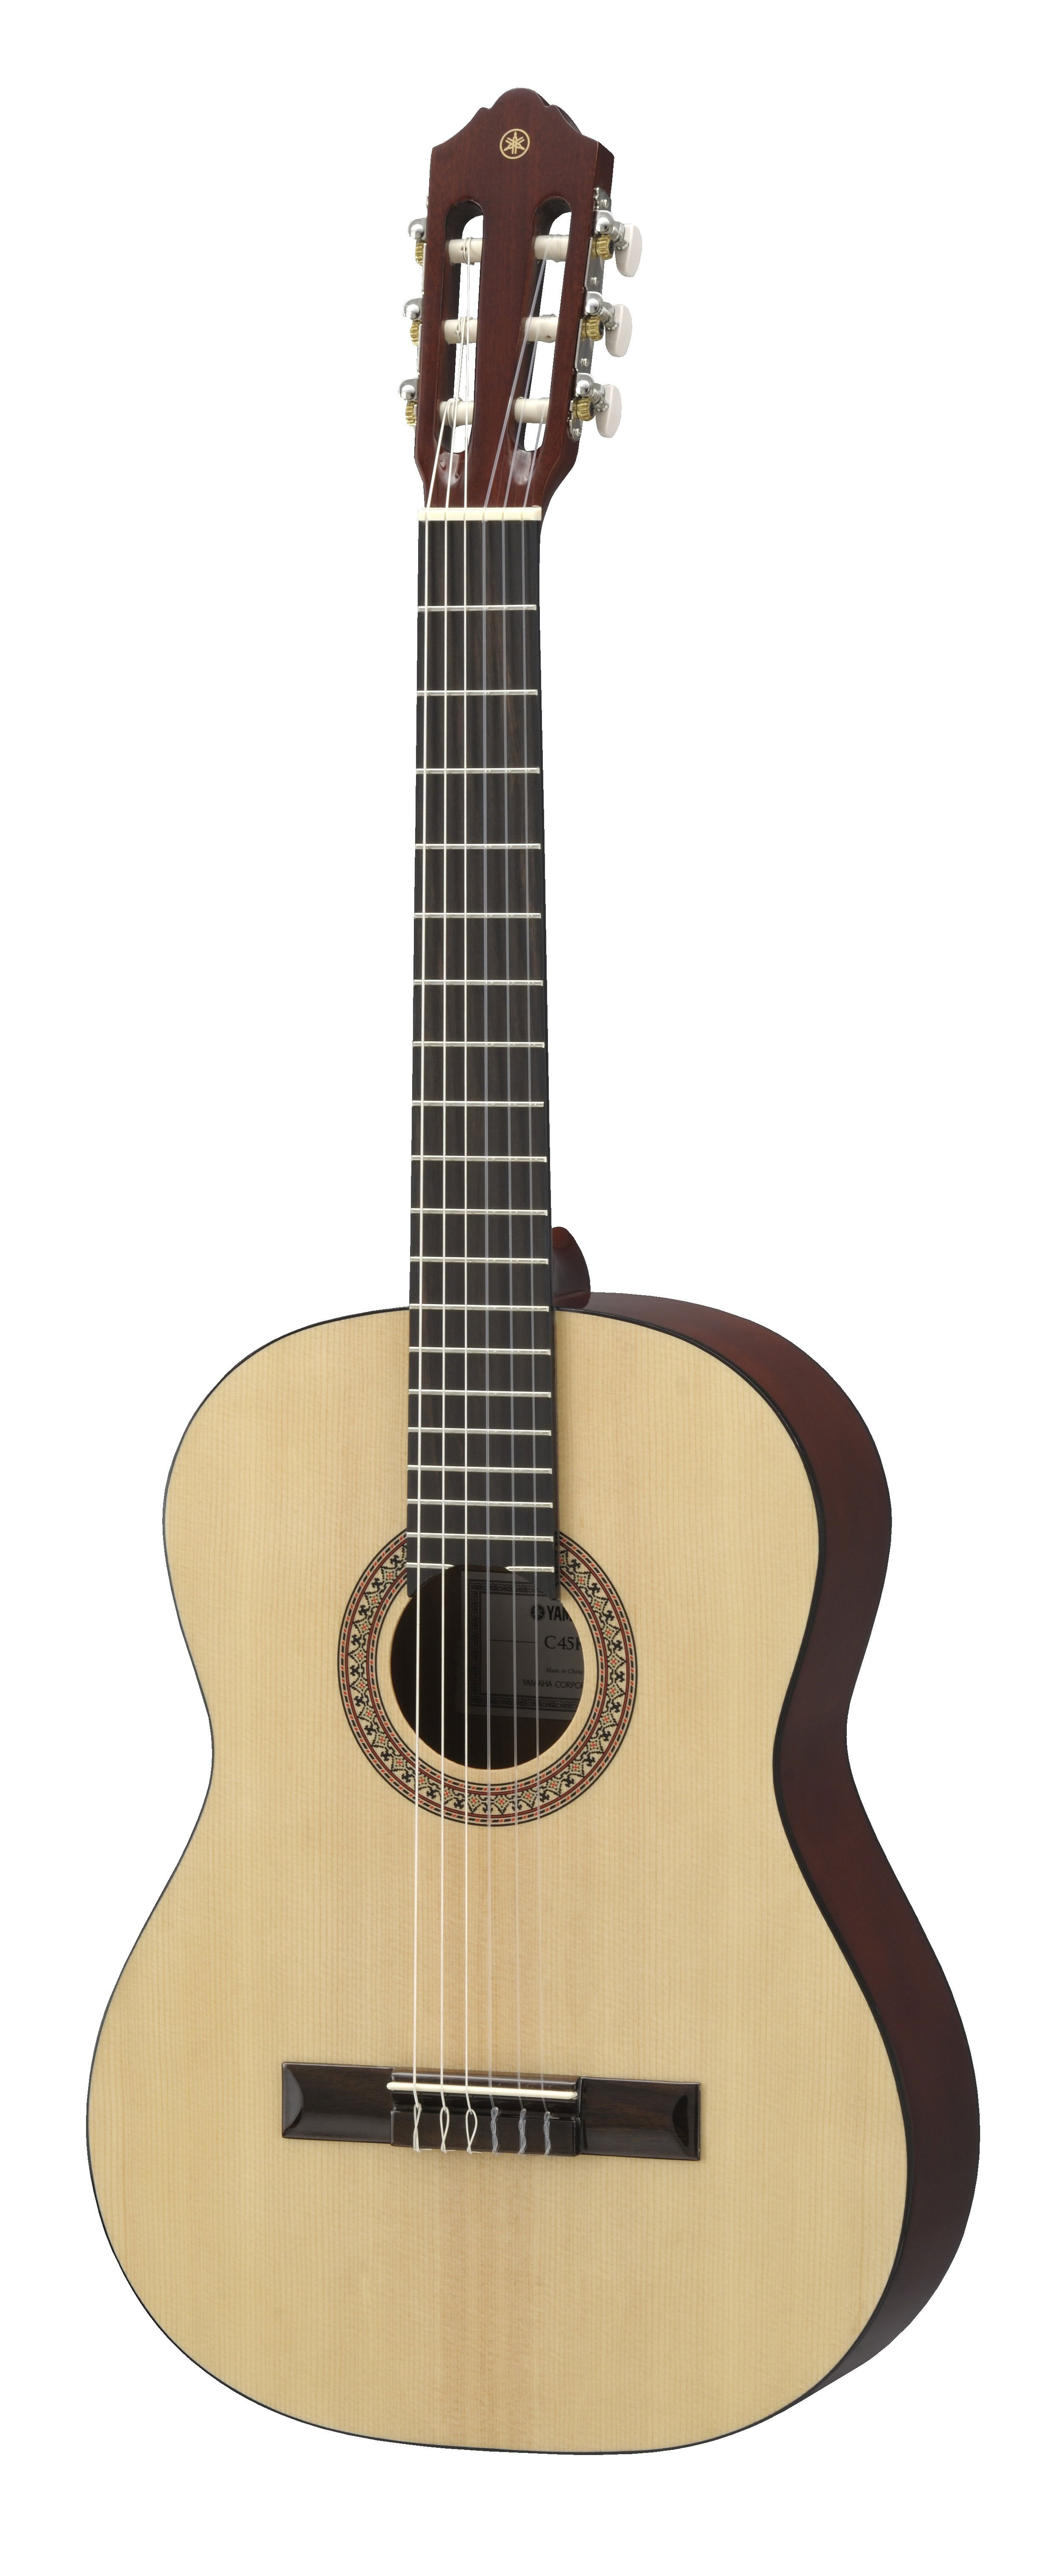 Yamaha C40 ii : The One Guitar I Recommend To My Students! 